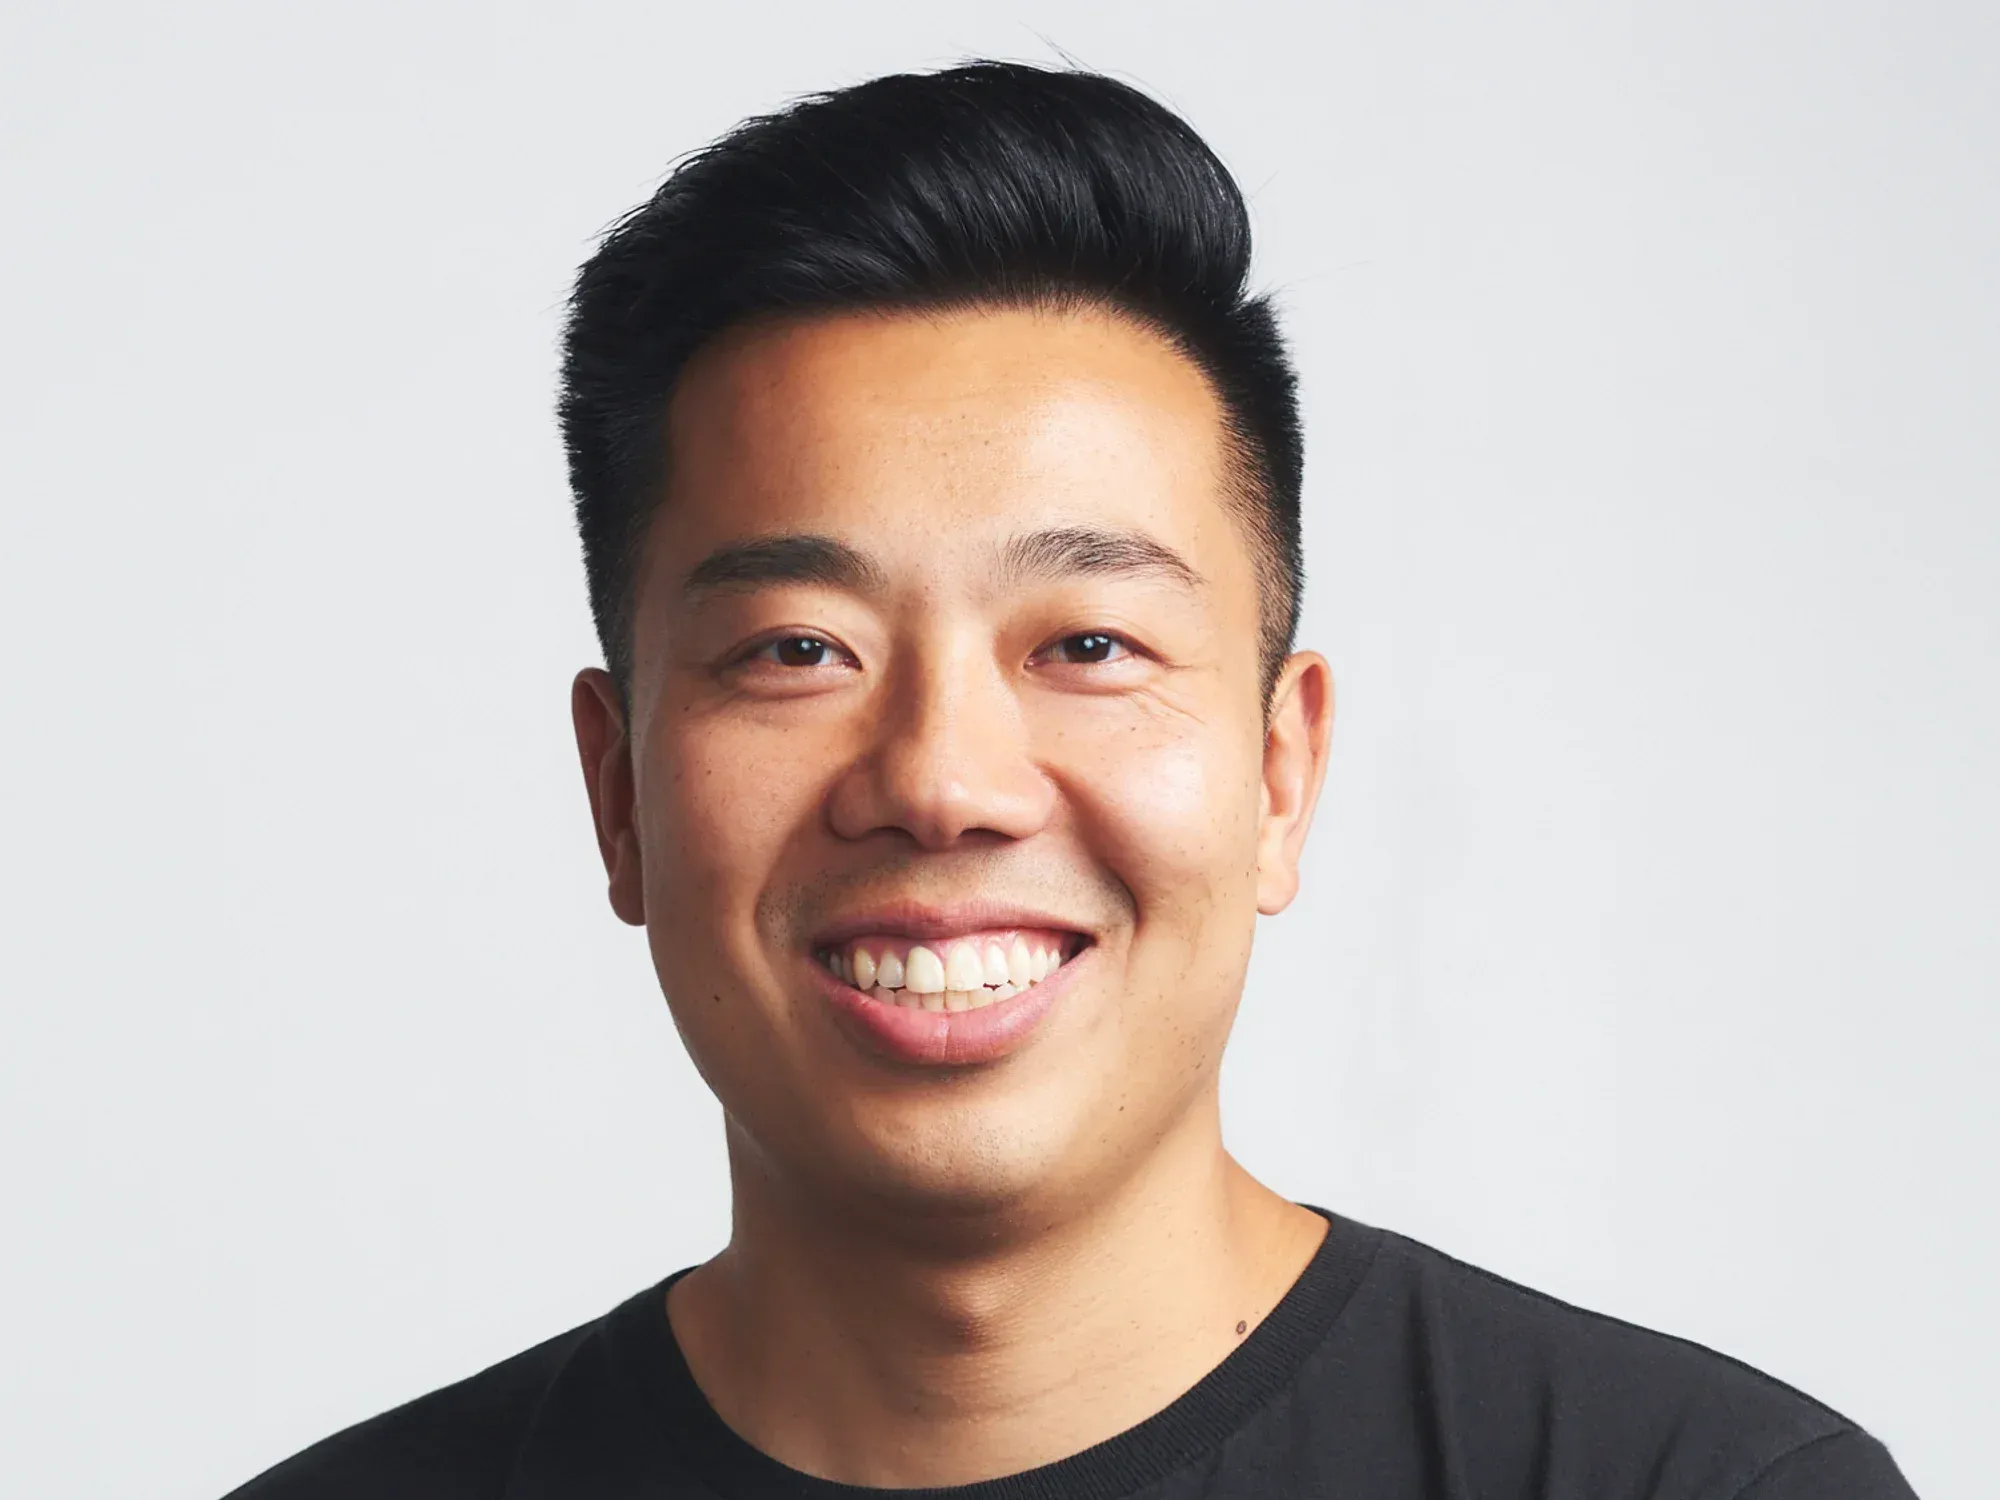 GOAT Co-founder Eddy Lu On How His Sneaker Startup GOAT Achieved Unicorn Status